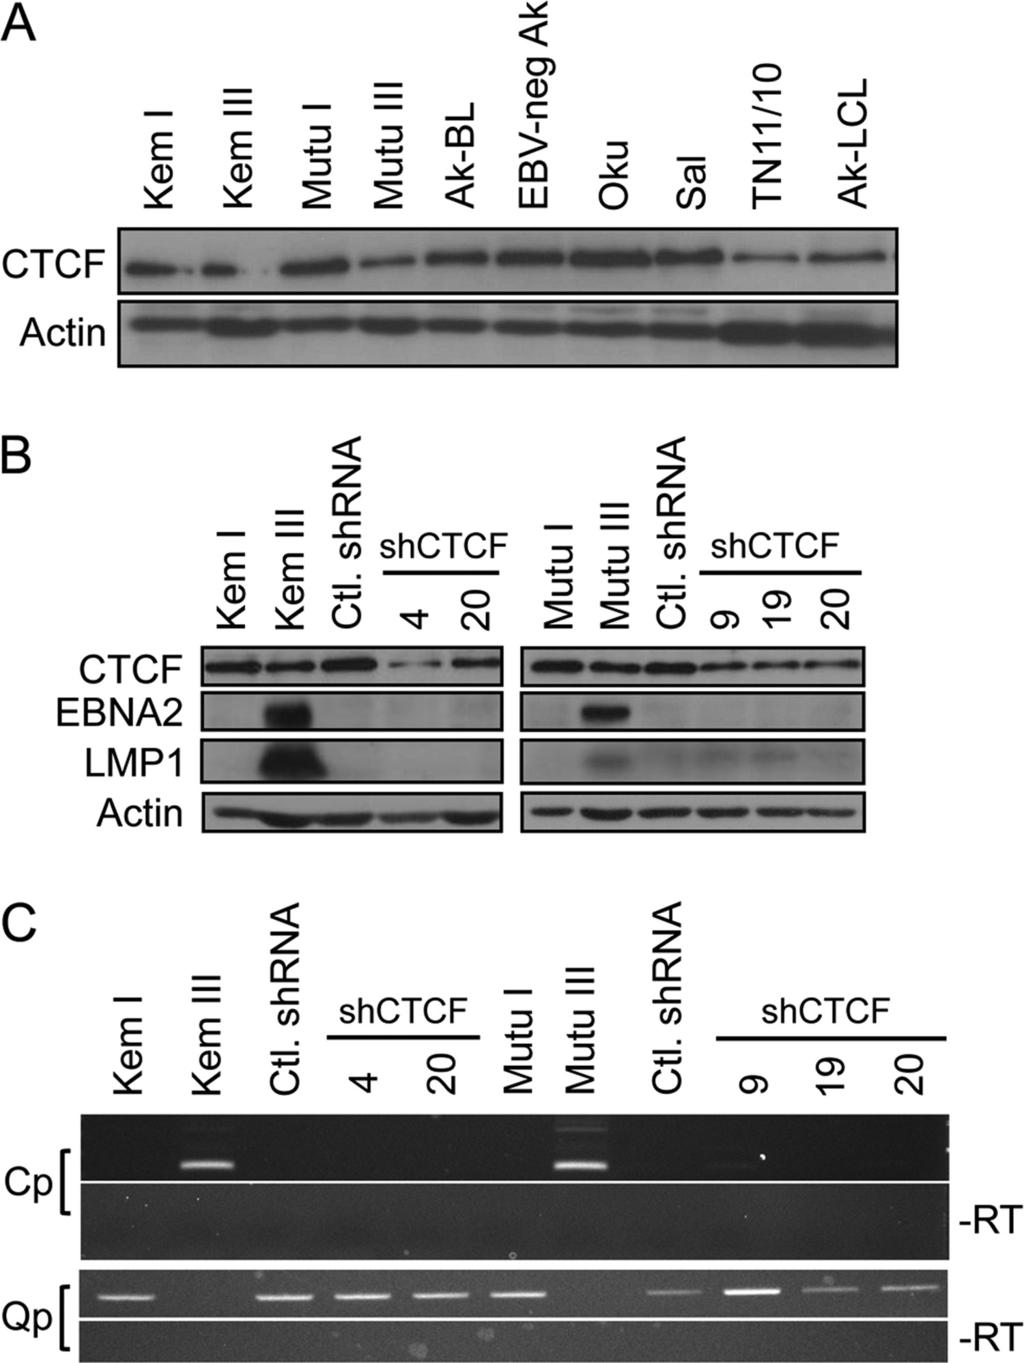 Control (Ctl.) lines expressed the standard control (non-dnmt-specific) shrna in addition to the DNMT3B-specific shrna.